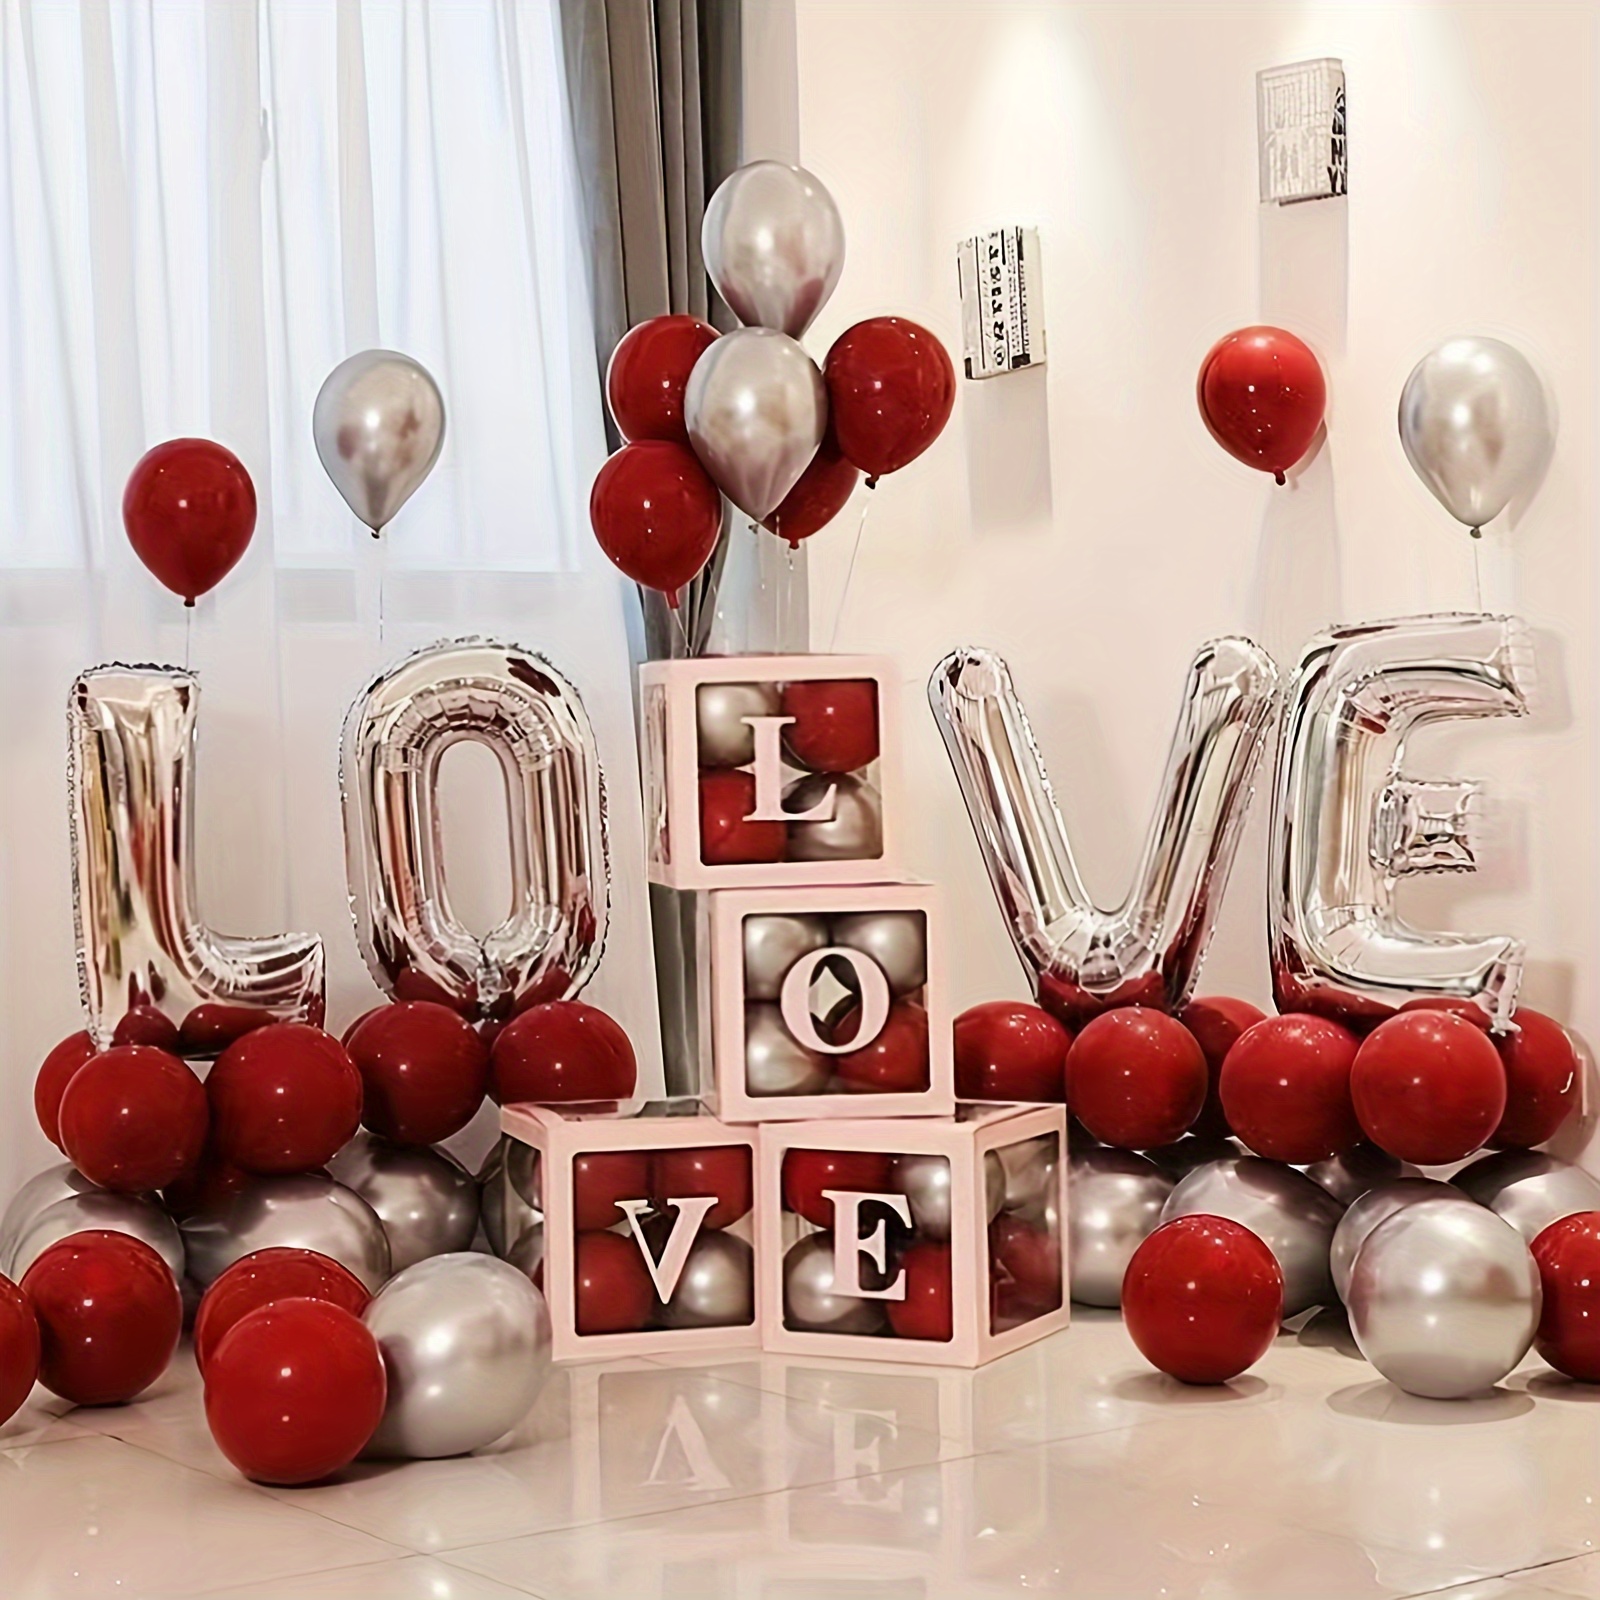 

30pcs, Red Silvery Balloons Set, Perfect For Birthday, Wedding, Valentine's Day, Thanksgiving, Christmas, New Year, House Decoration, Balloon Arrangement, Balloon Party Easter Gift